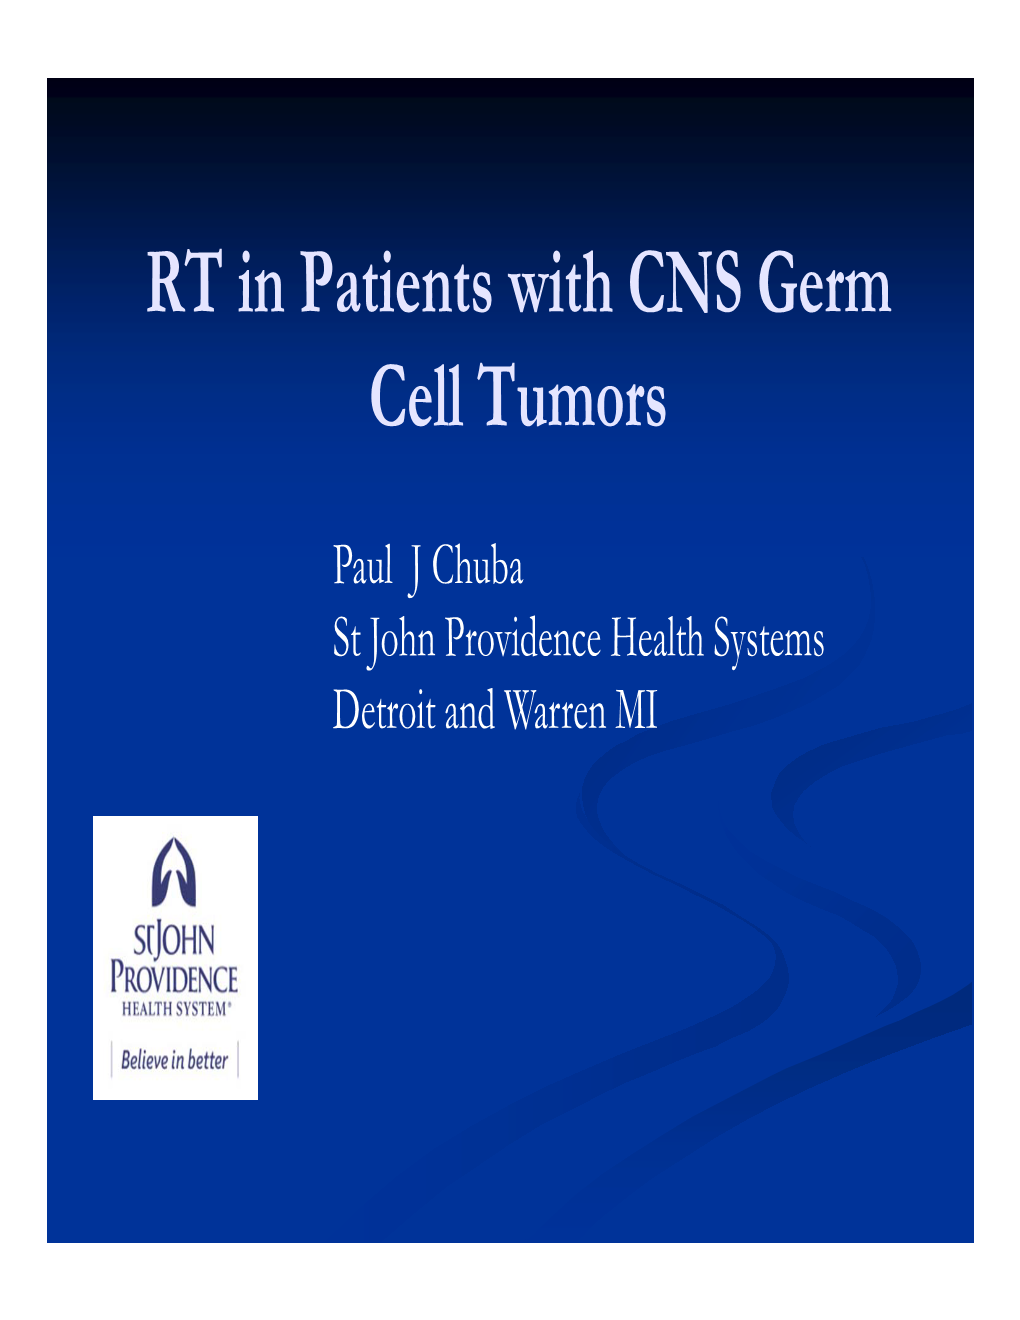 RT in Patients with CNS Germ Cell Tumors